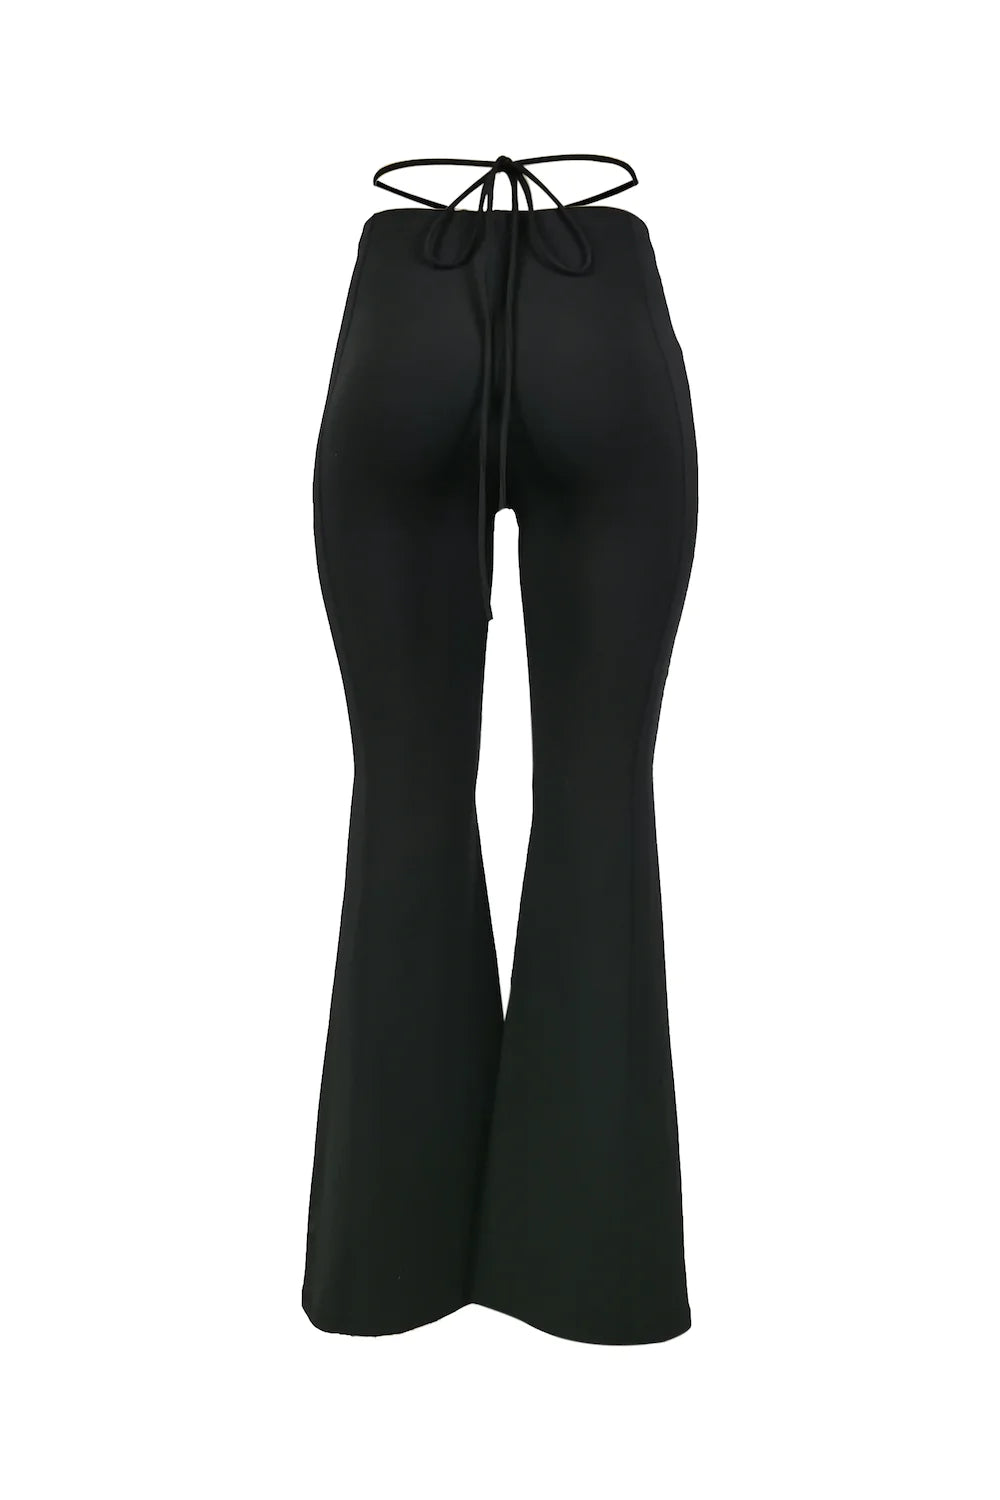 High Waist Flare Legging - Shop Resew House at EARTHKIND